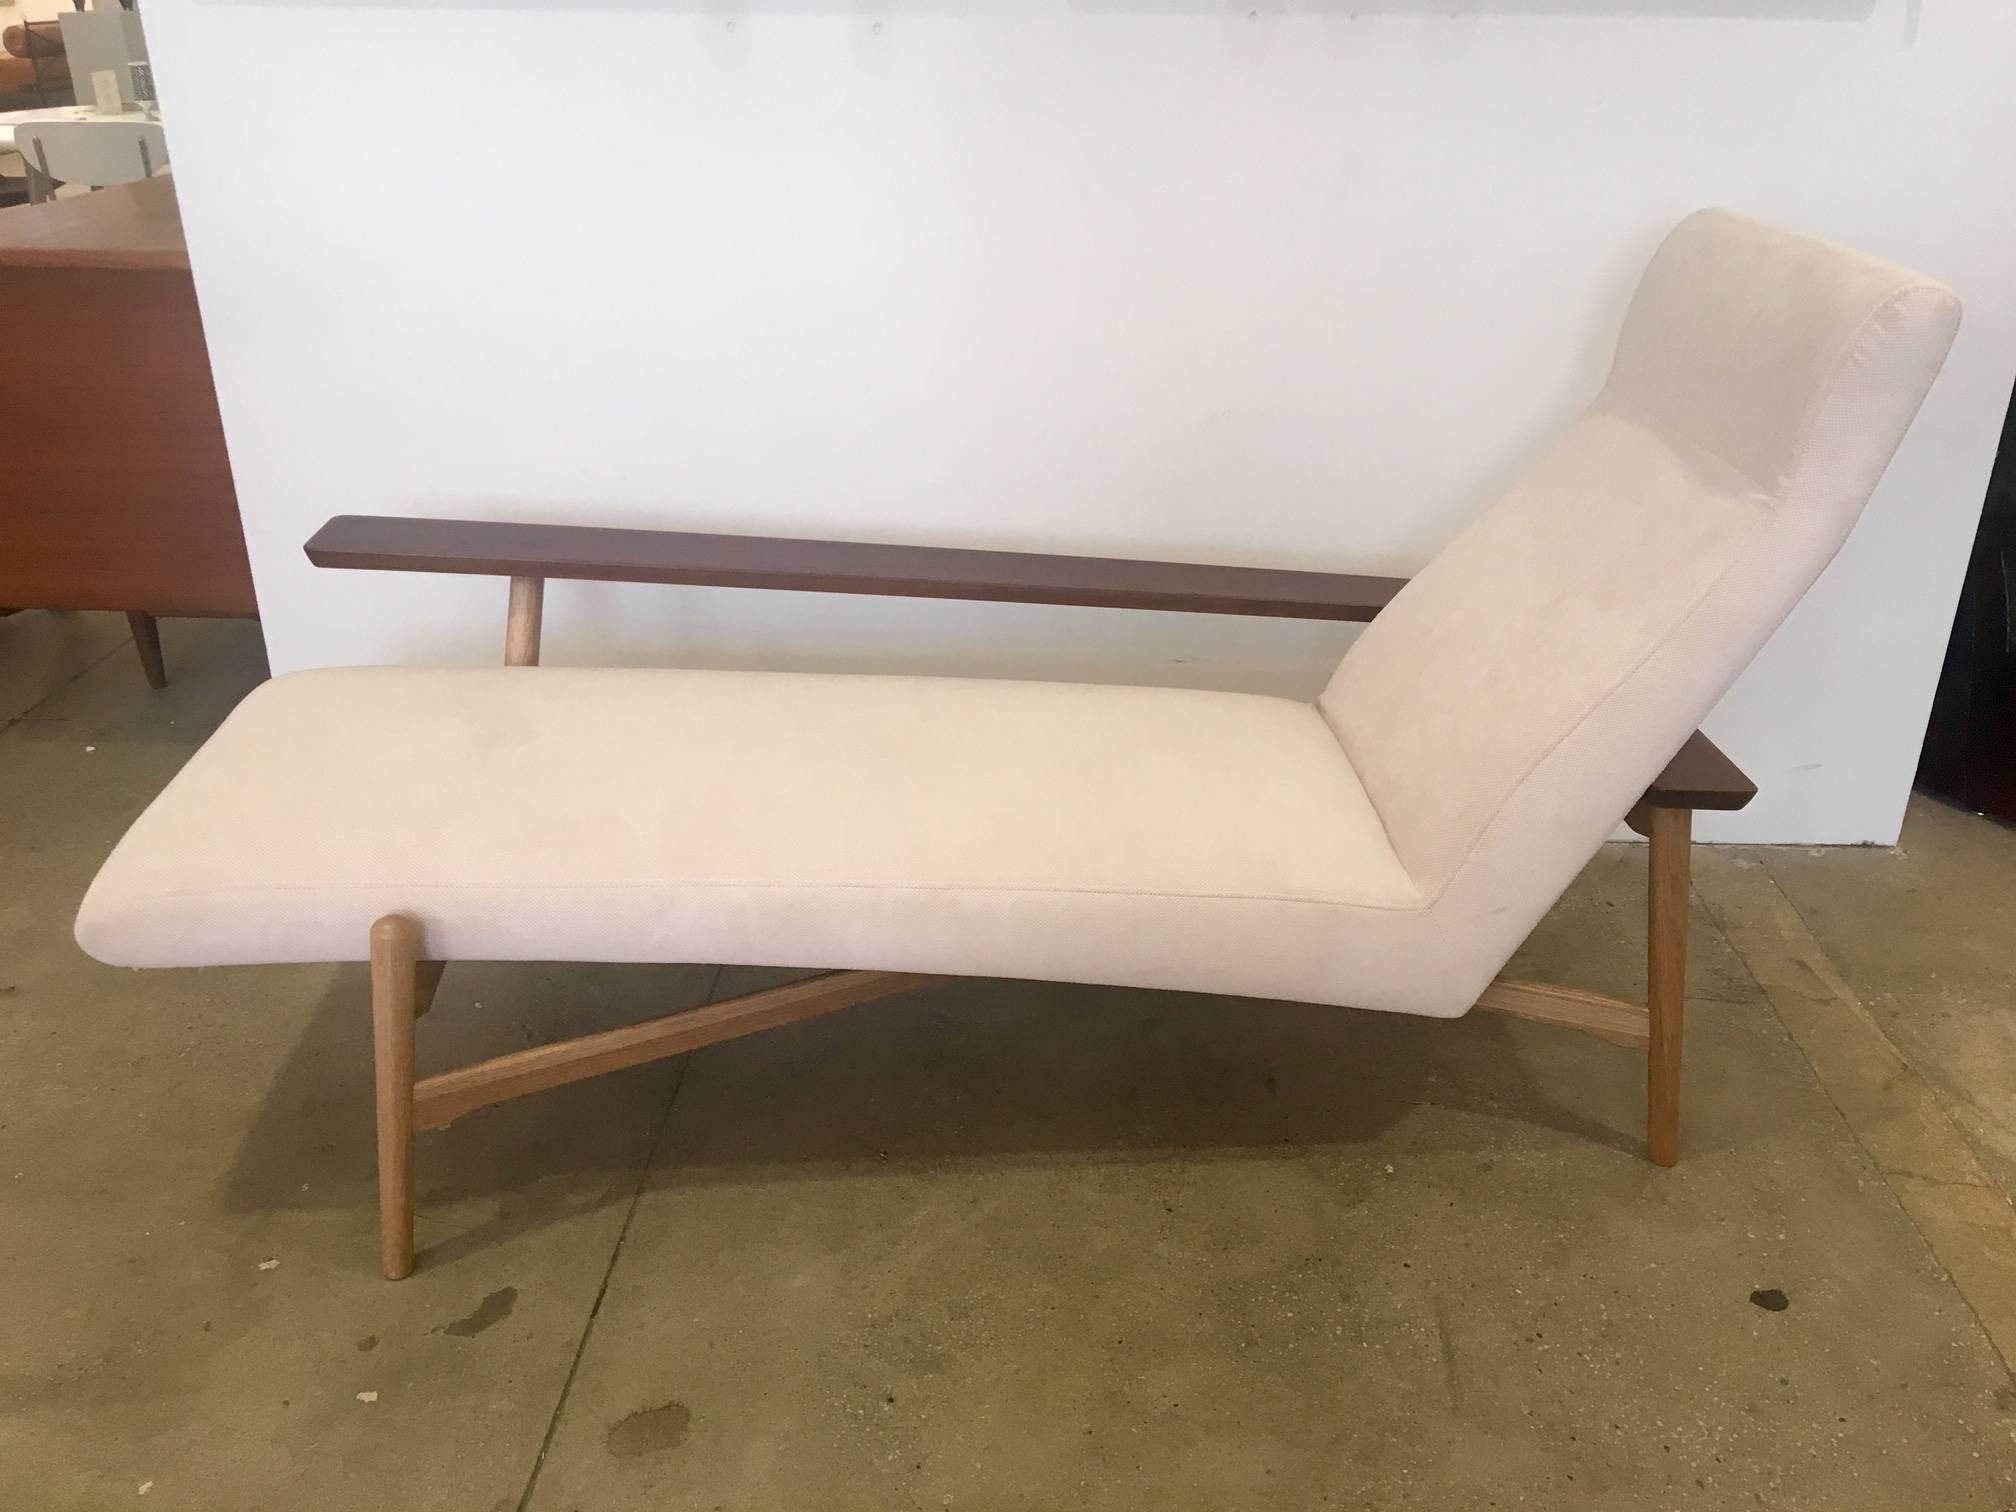 Elegant Mid-Century Modern style chaise longue with asymmetric walnut arm, beech frame and off-white upholstery. Great lines and comfort.